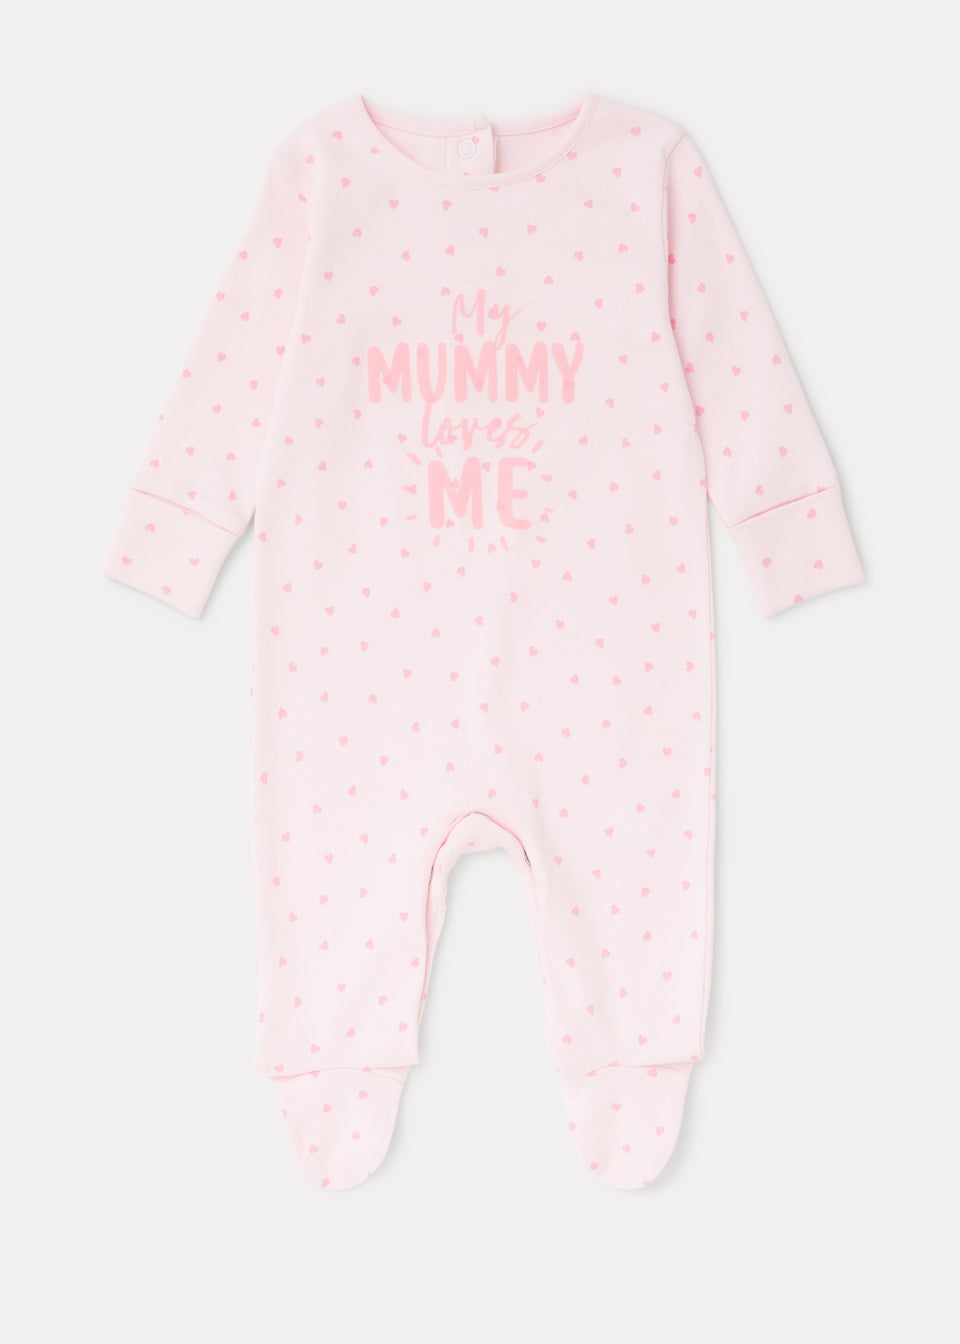 Baby Pink Mummy Loves Me Sleepsuit (Tiny Baby-18mths)